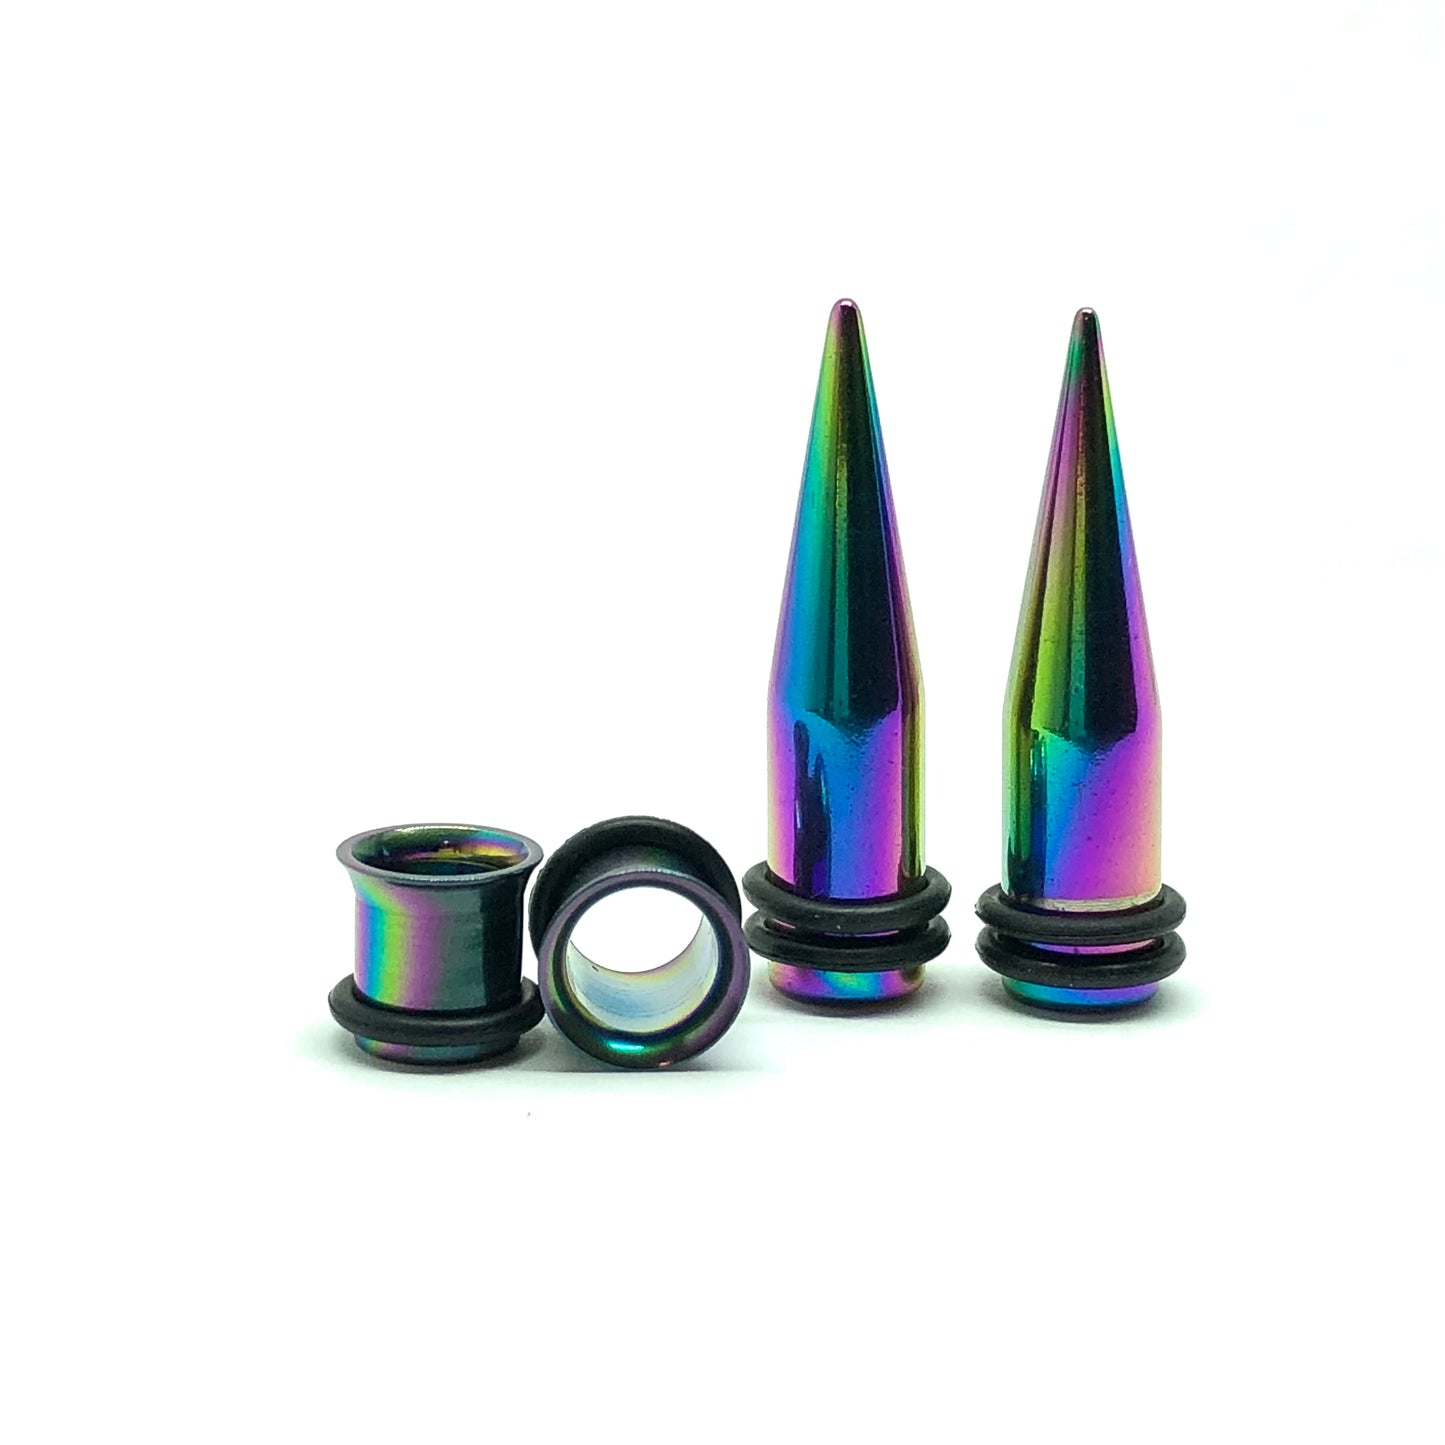 Stainless Steel Ear Gauges Tapers and Plugs set Rainbow oil slick style 0G 8mm 